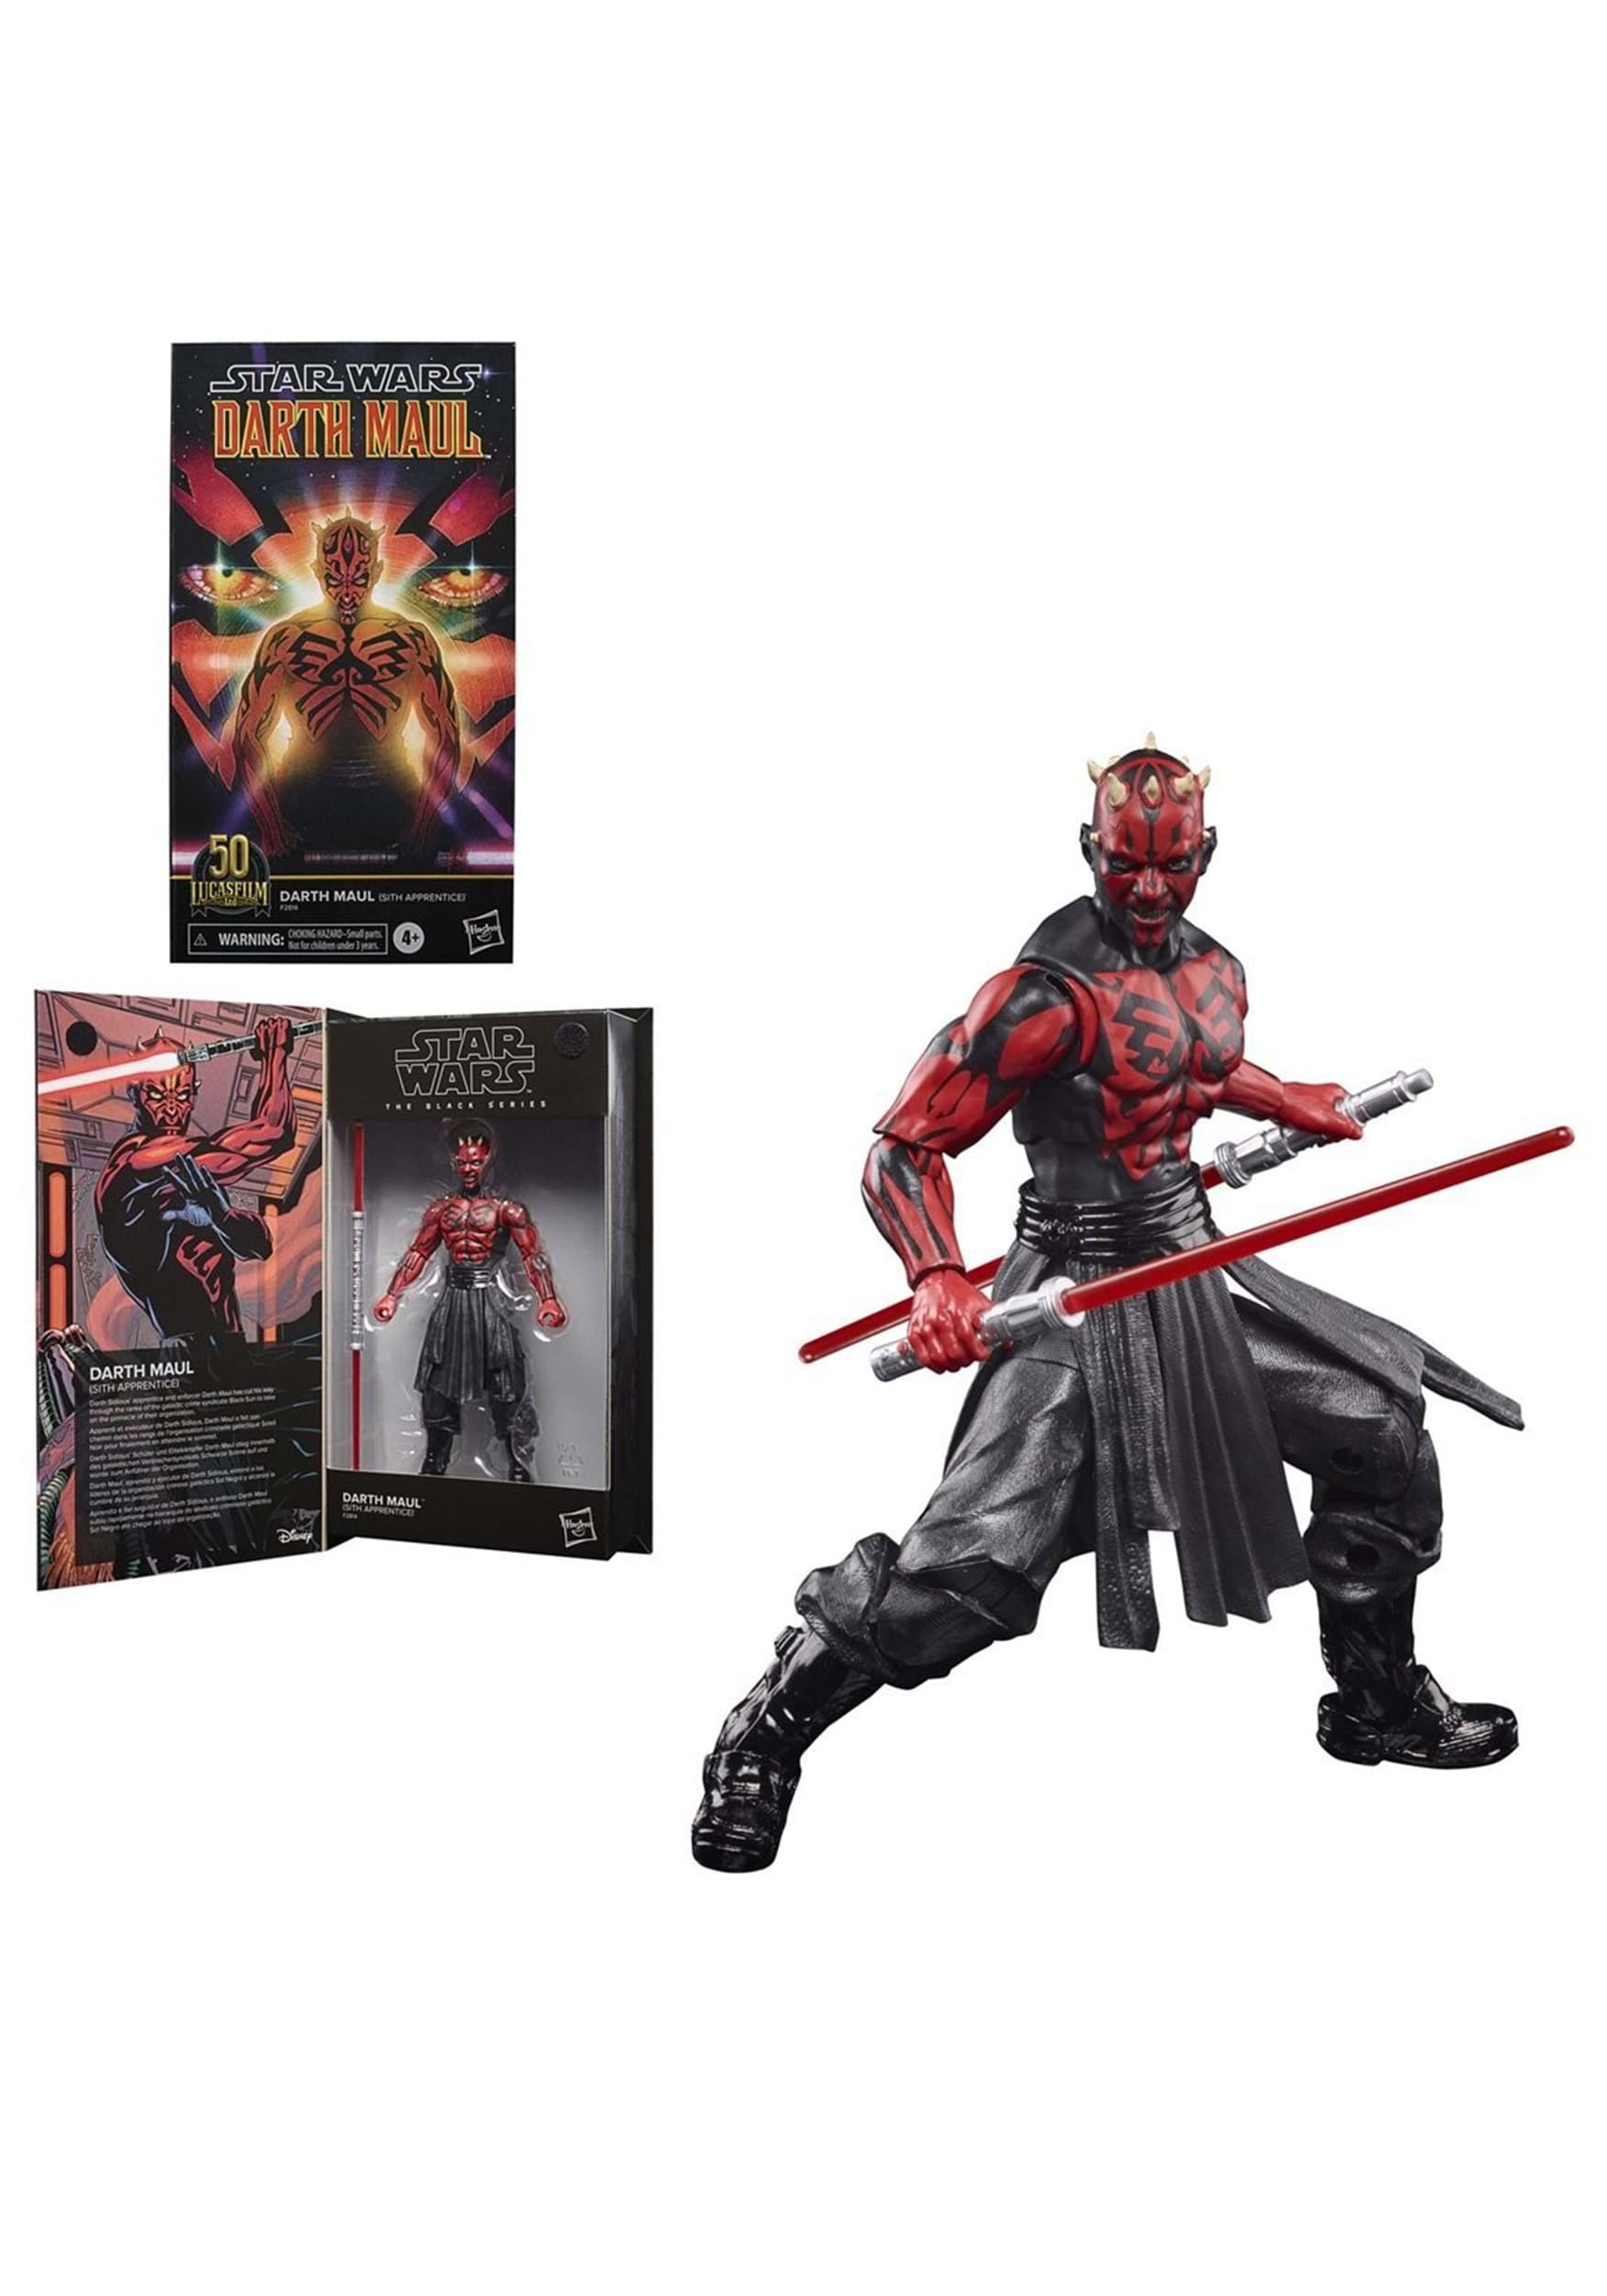 New Darth Maul:Star wars the Black Series 6"Action Figure Xmas gift  in box 